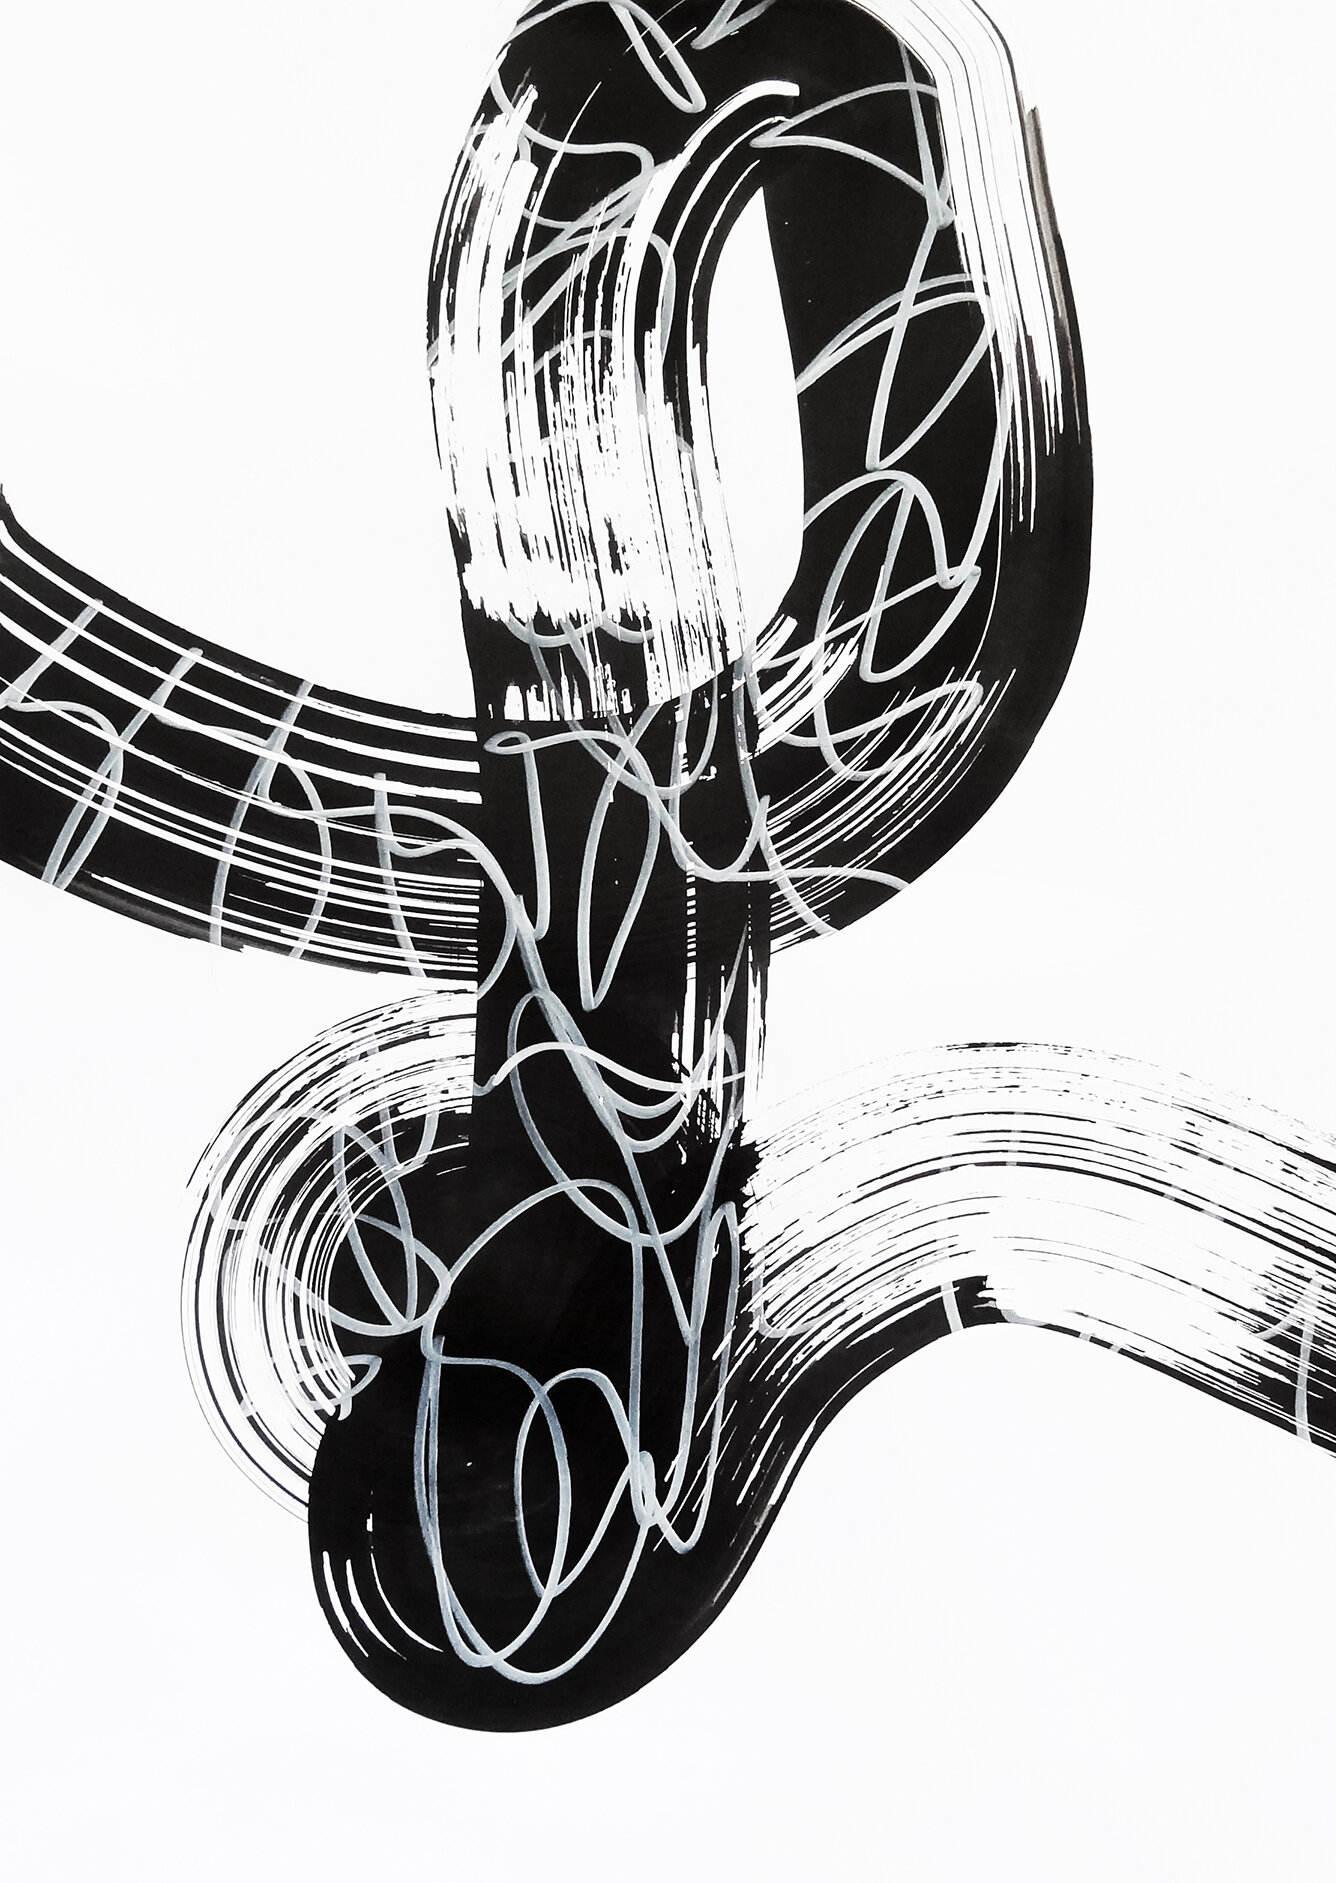  Untitled, 2020 strokes series calligraphy ink on paper 42,0 x 29,7 cm (14-20) 